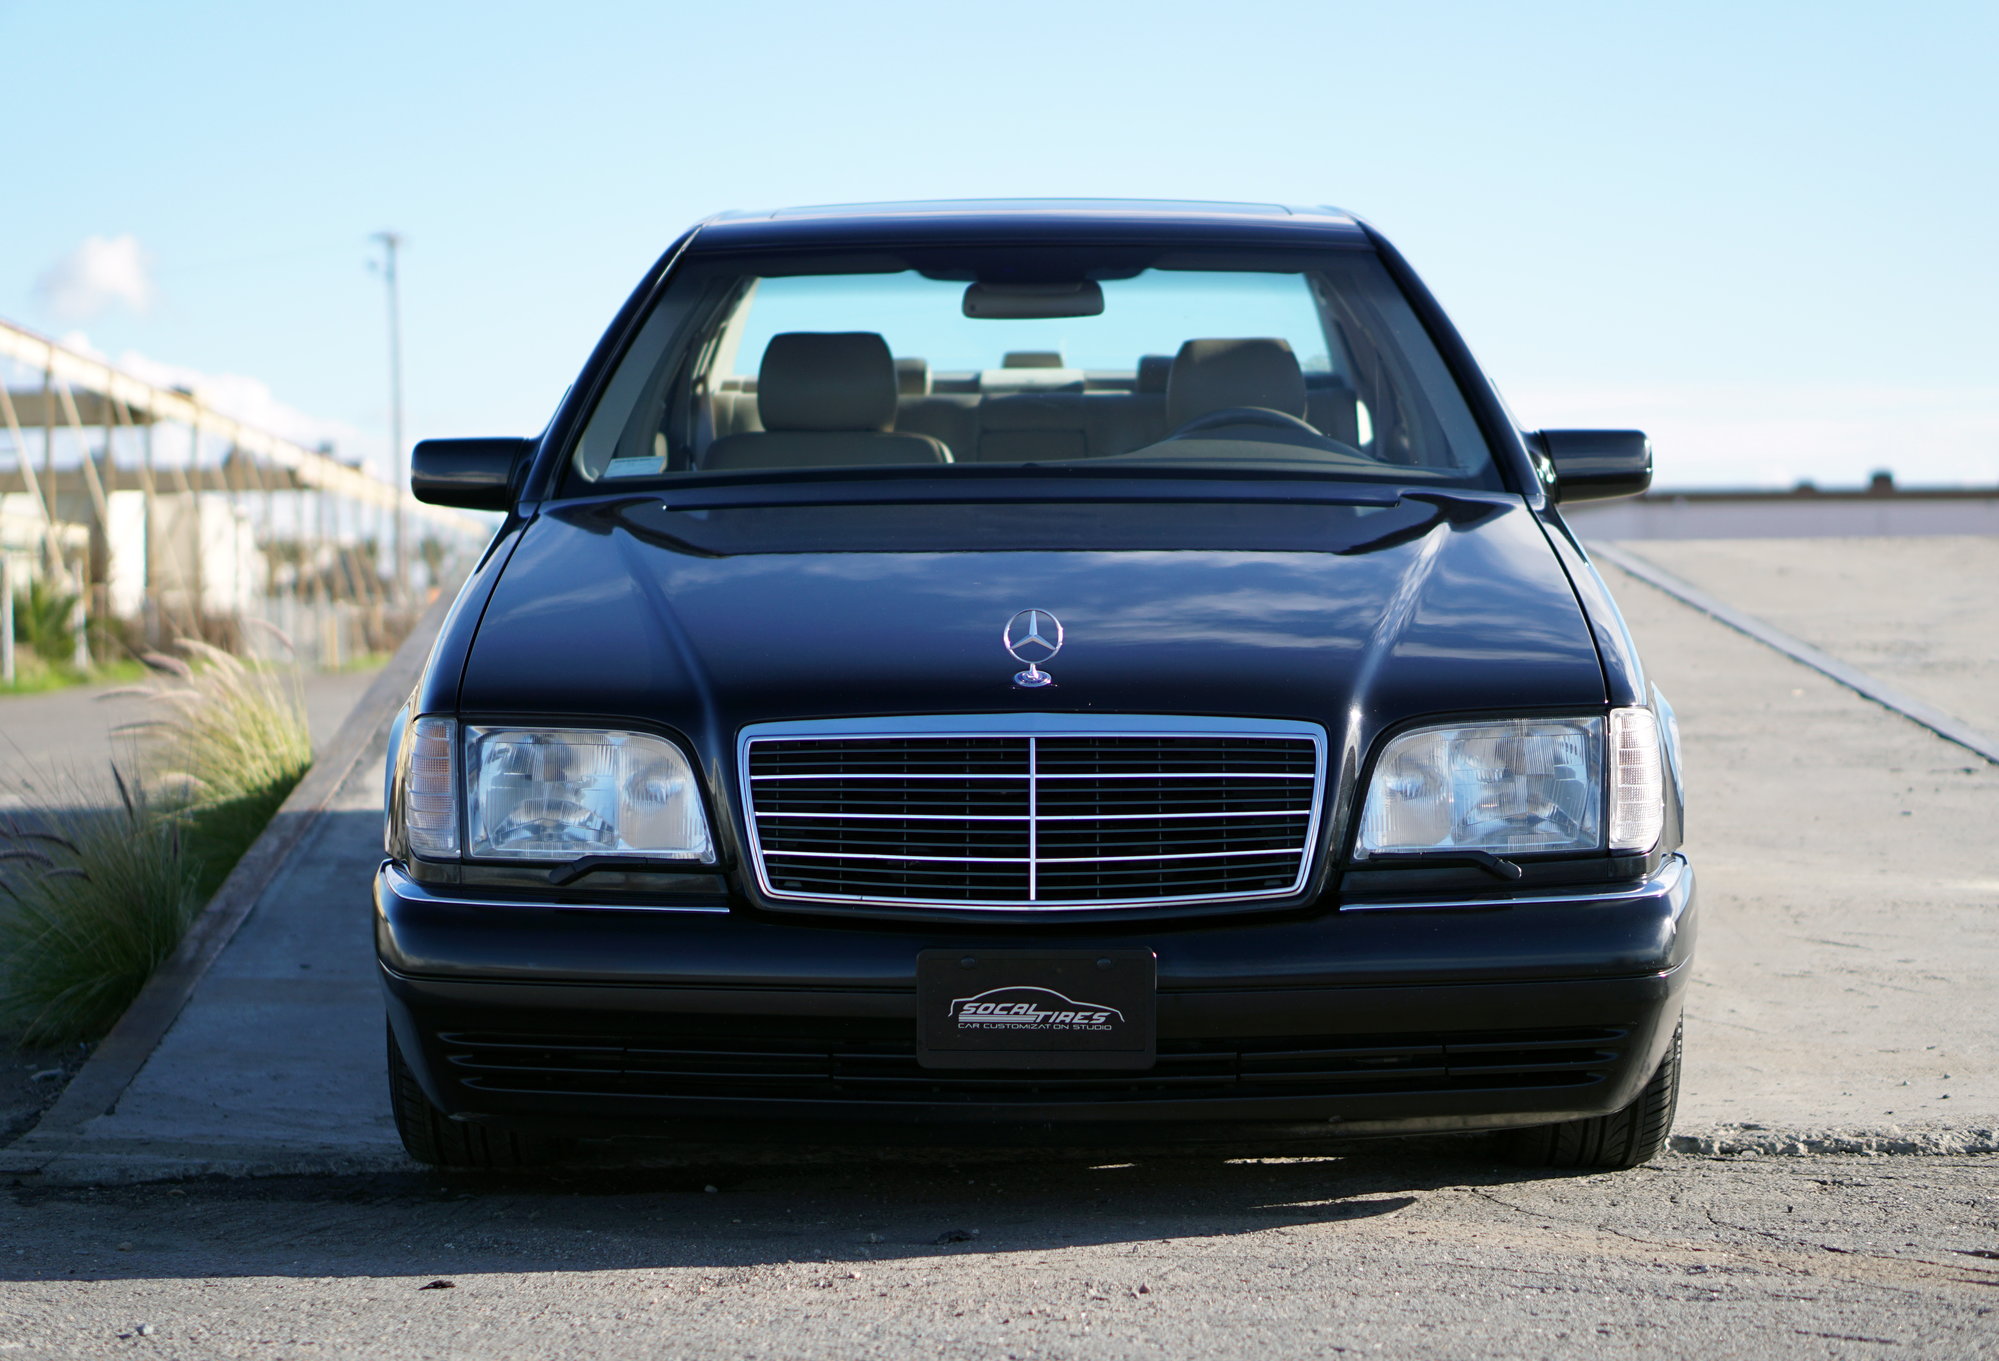 1998 Mercedes-Benz S320 - FS:  1998 Mercedes-Benz s320 /Extremely Clean / Upgrades / Fully Maintained / Stanced - Used - VIN WDBGA33G6WA399987 - 146,200 Miles - 6 cyl - 2WD - Automatic - Sedan - Black - Lemon Grove, CA 91945, United States